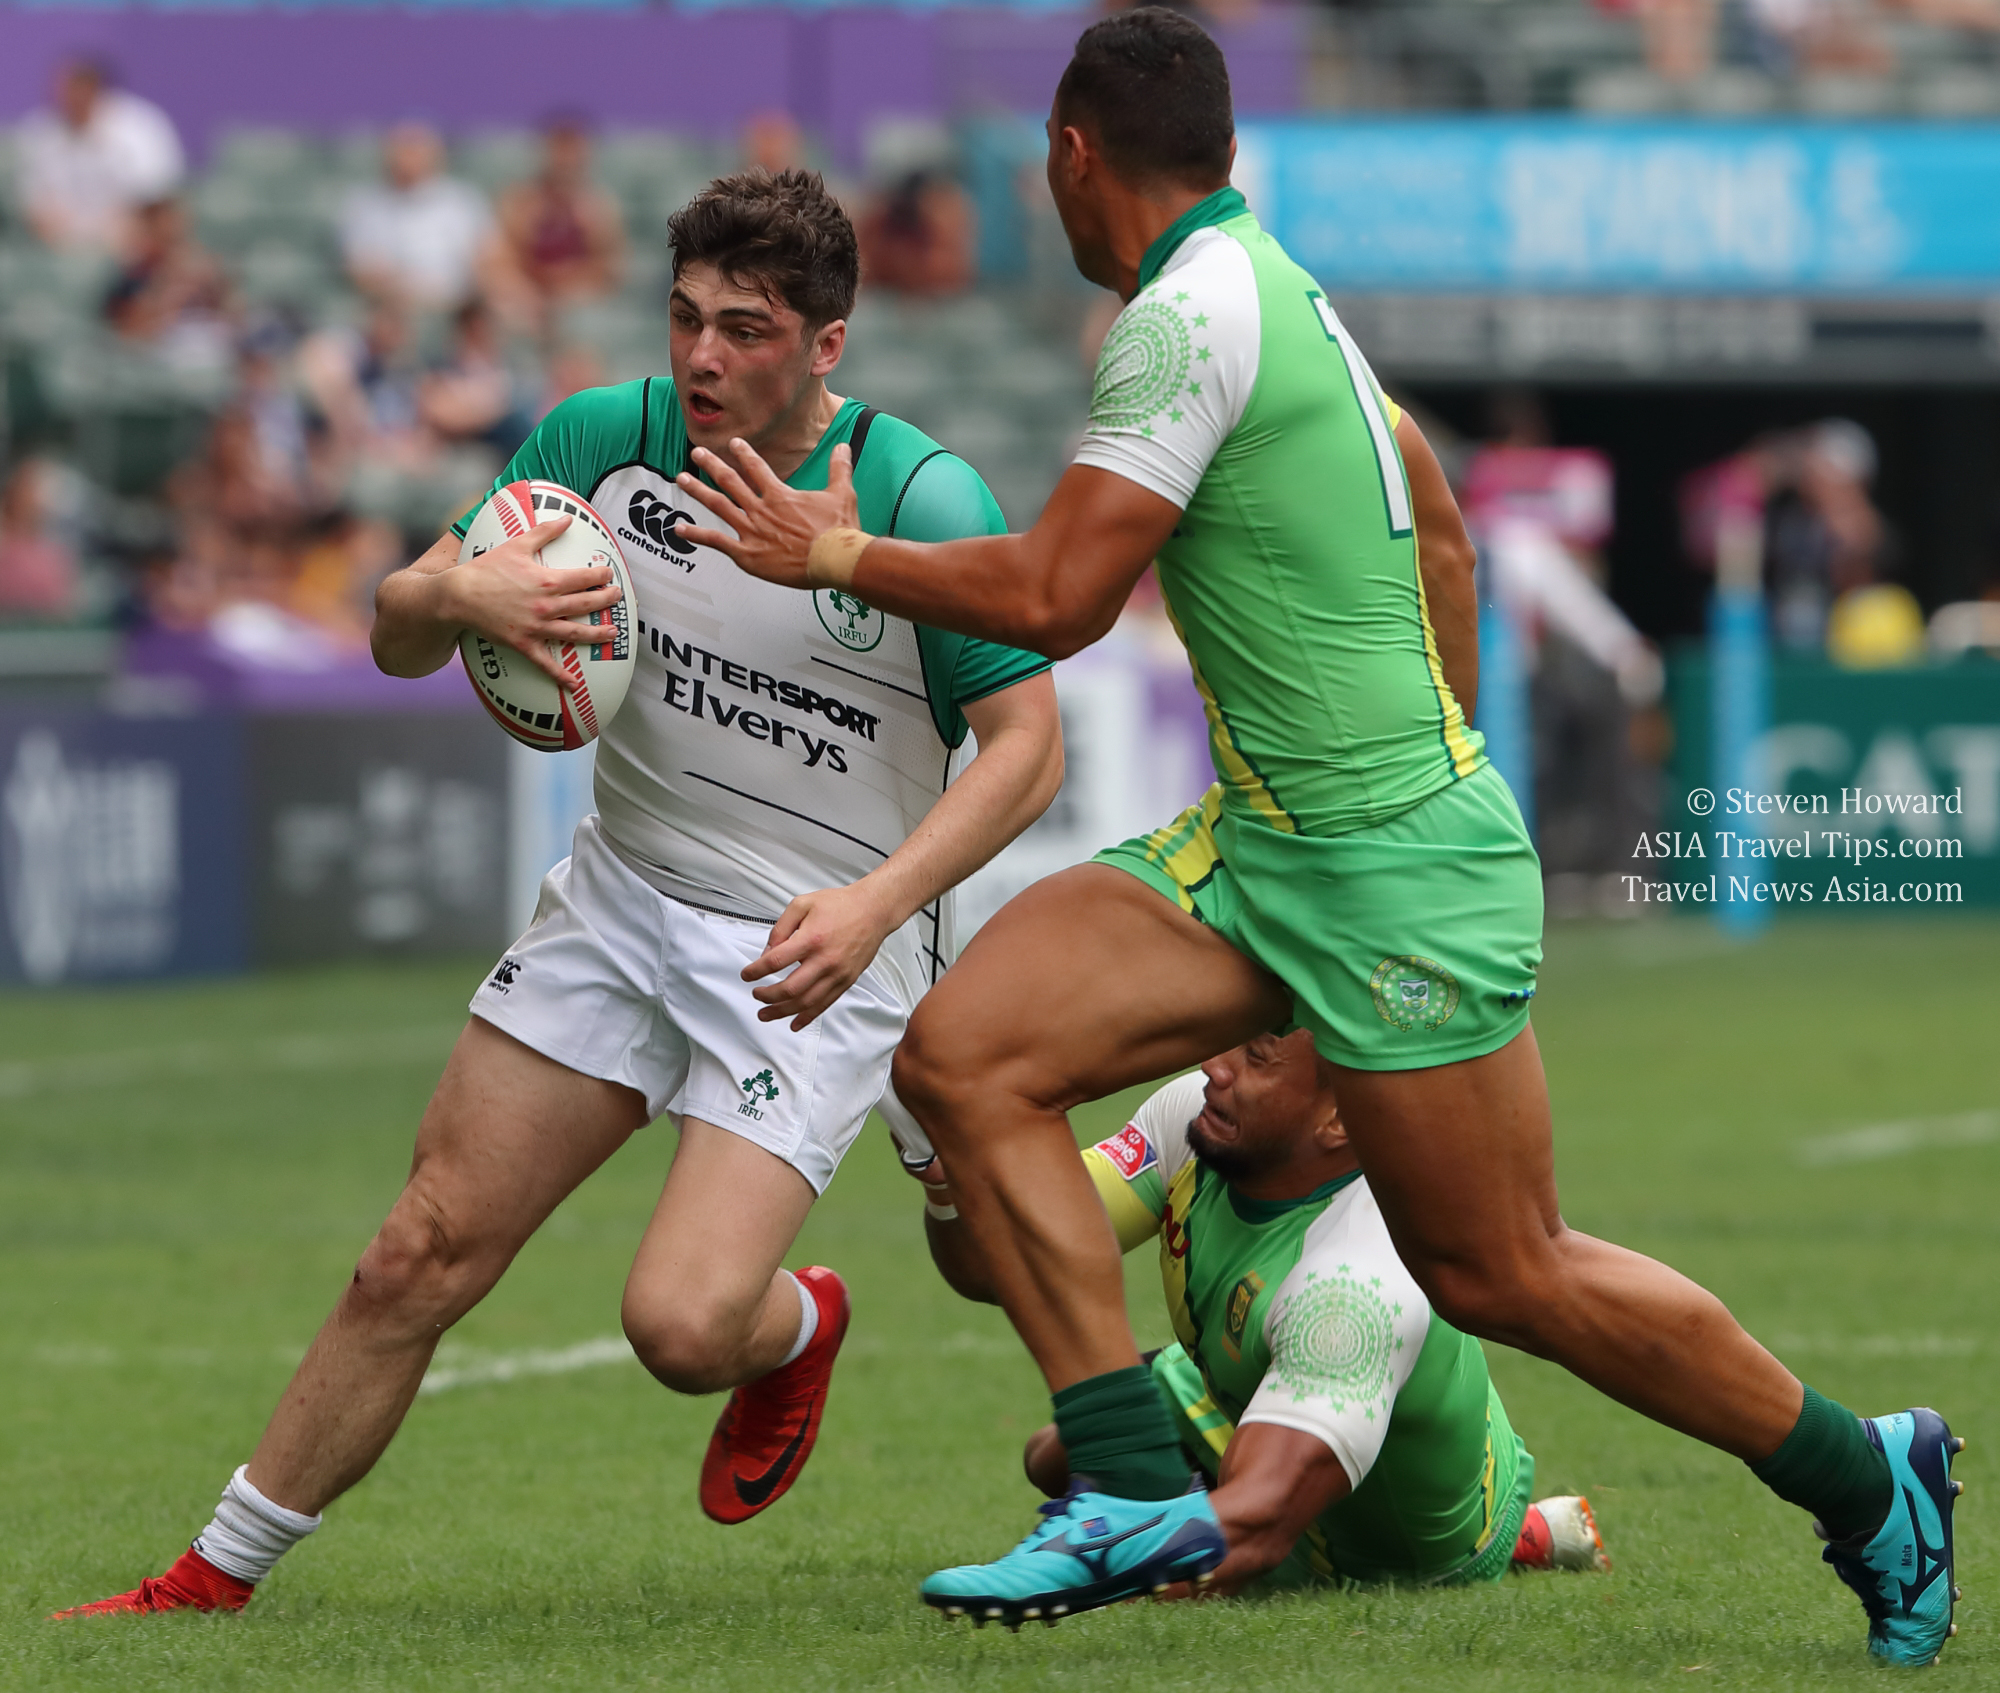 Action from the Cathay Pacific / HSBC Hong Kong Sevens 2018. Picture by Steven Howard of TravelNewsAsia.com Click to enlarge.